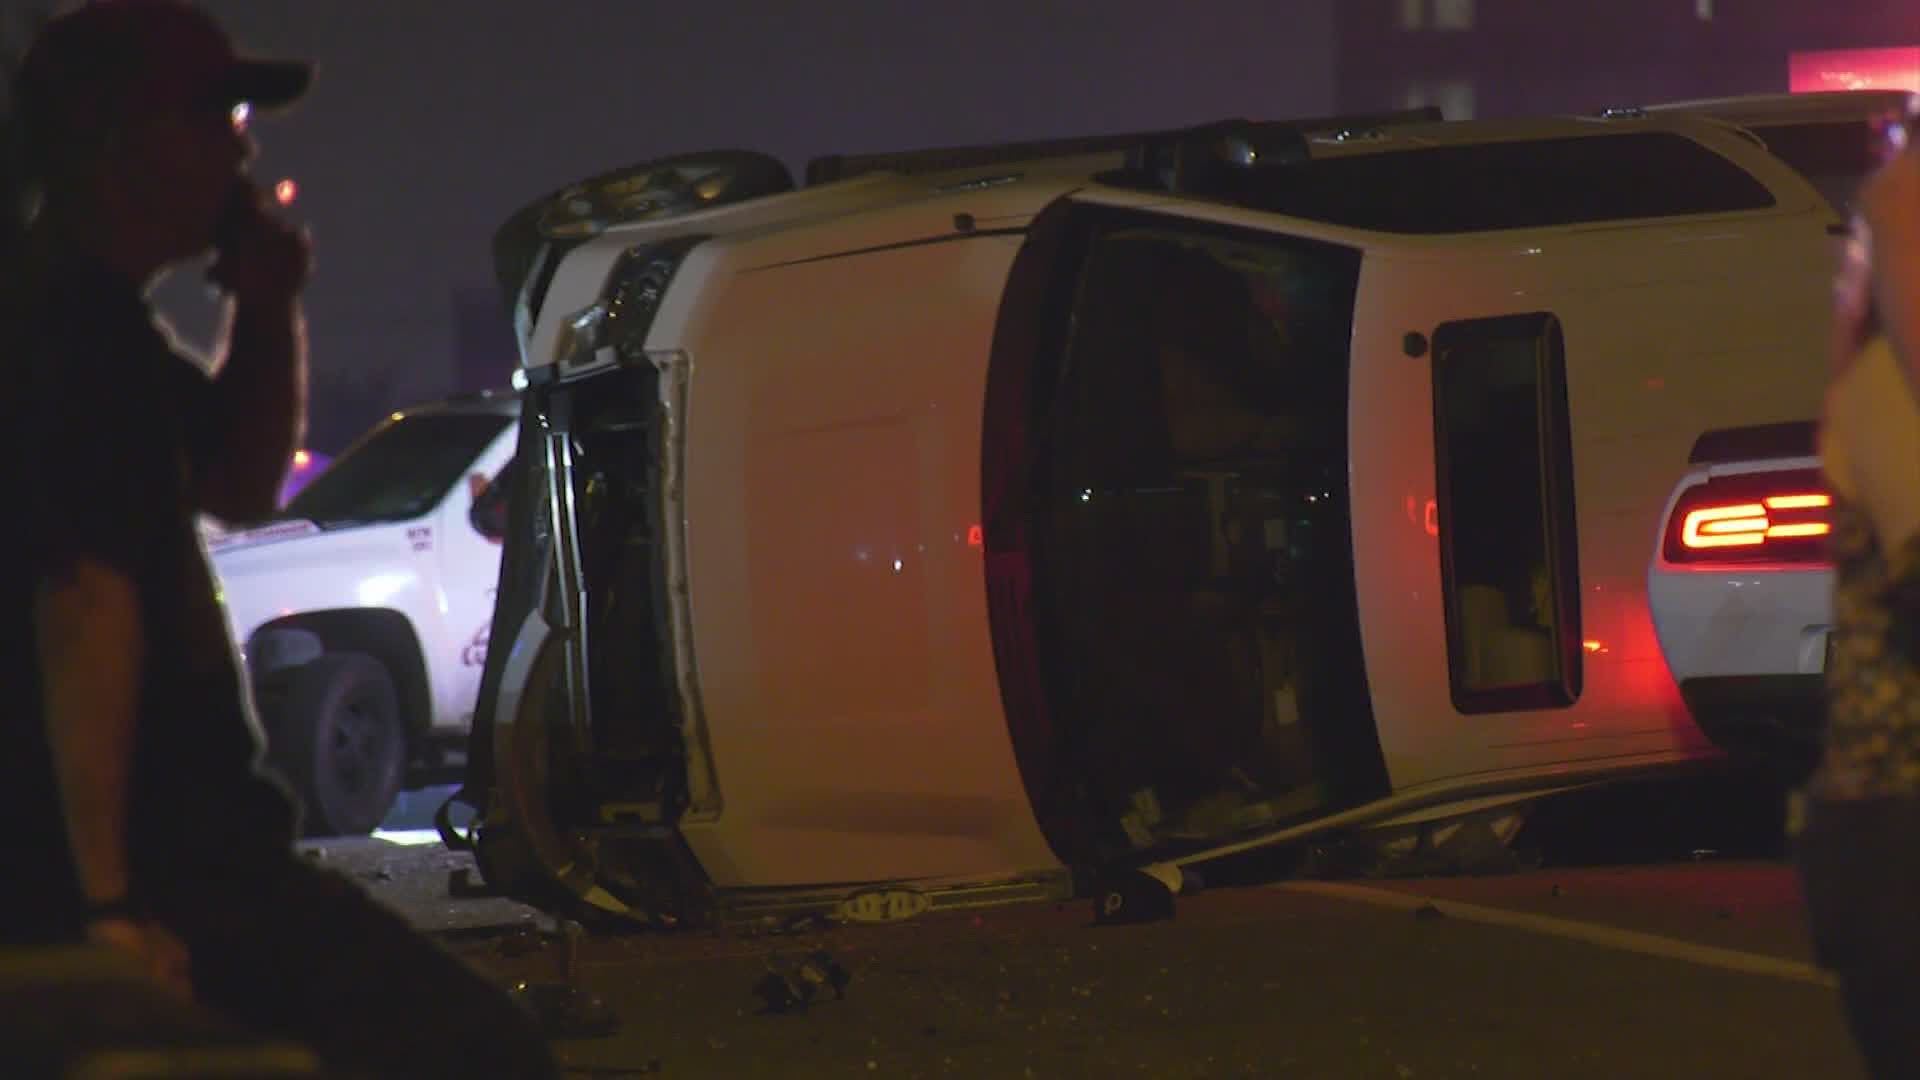 Two people were killed and four were injured in a multi-vehicle crash on the East Freeway. Police said it doesn't appear alcohol played a role.